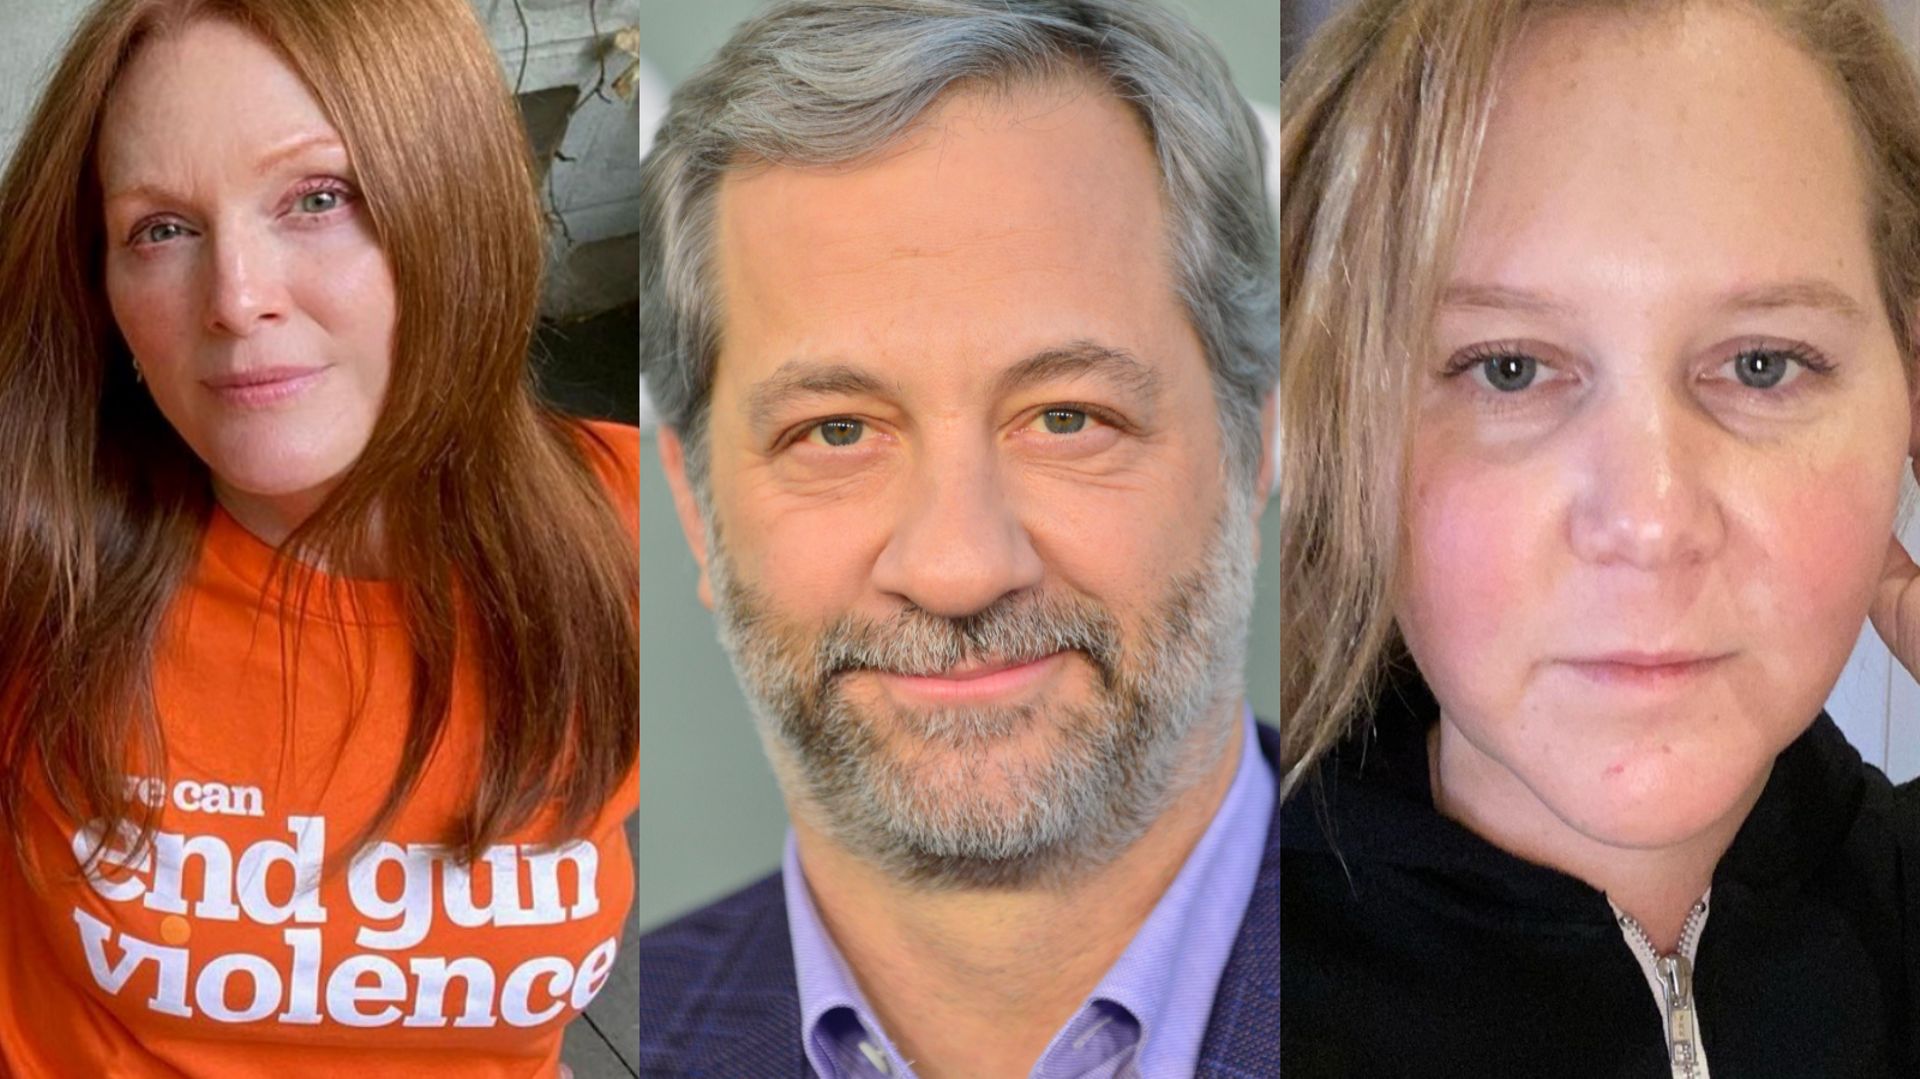 Julianne Moore
Judd Apatow
Amy Schumer